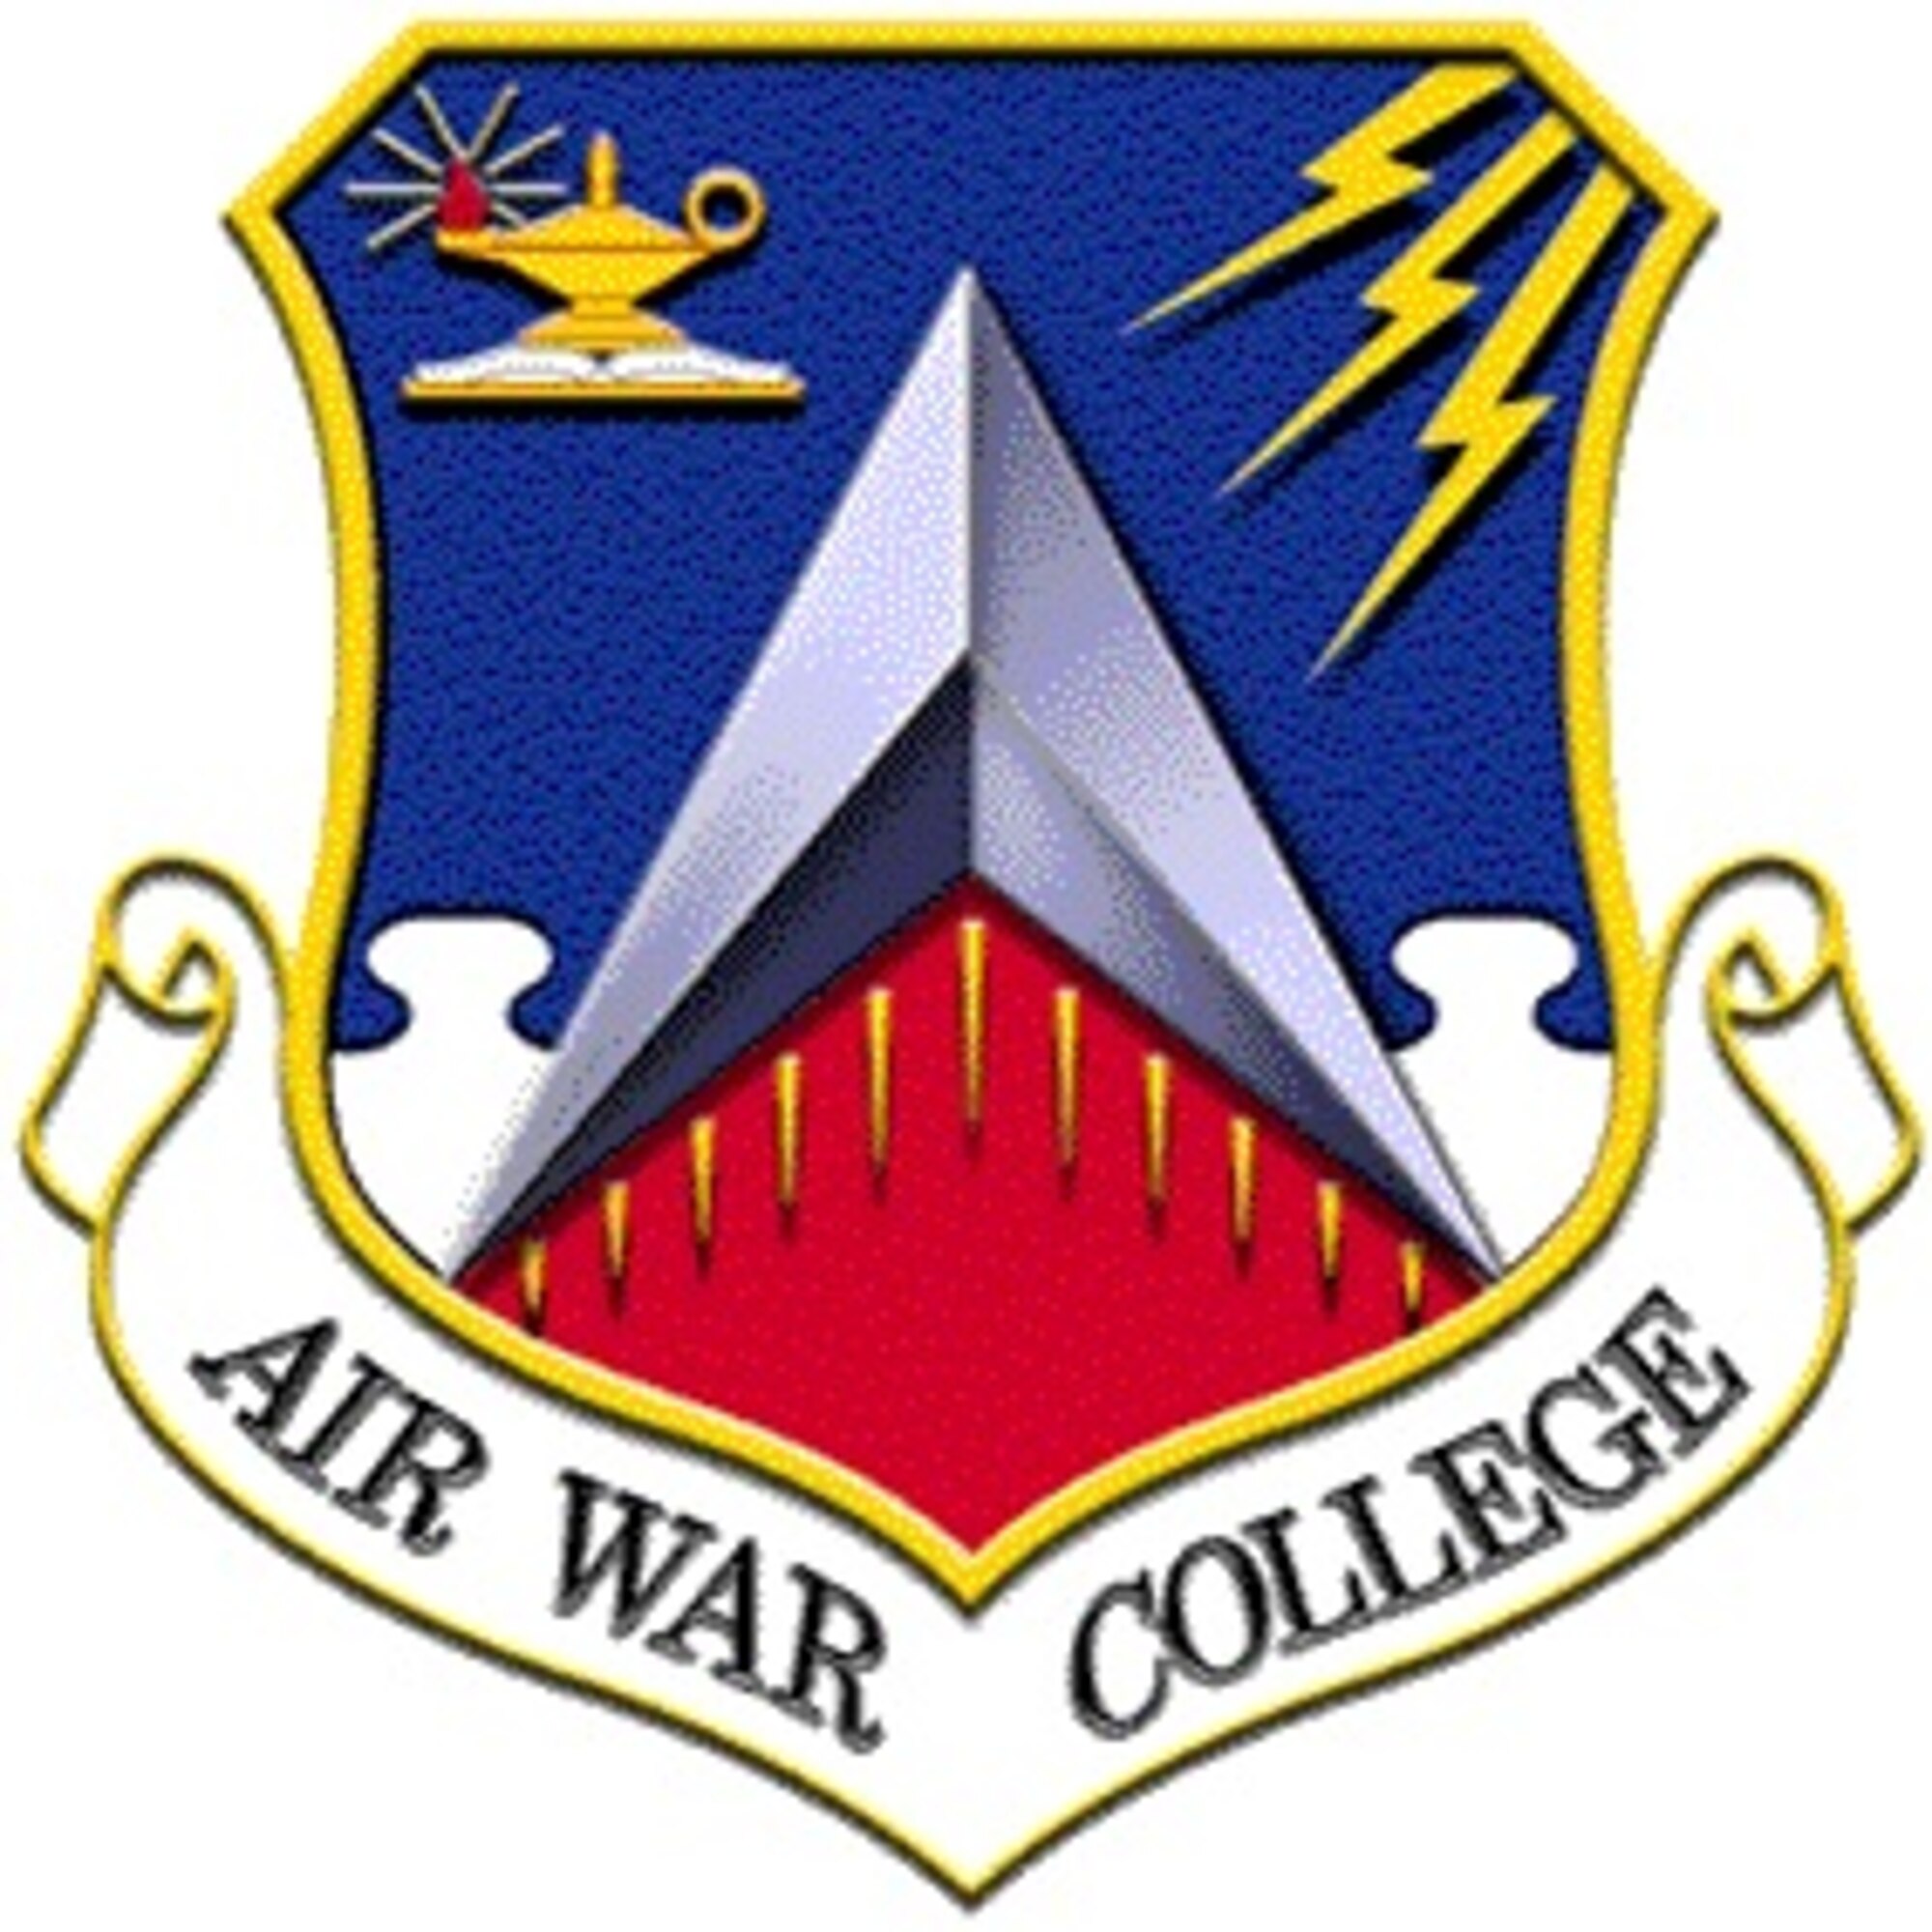 Every academic year, students at the Air War College (AWC), Maxwell Air Force Base, Ala., write professional studies research papers during their 10 months in residence that address questions raised by strategic leaders across all military service branches and in many government agencies. (U.S. Air Force graphic)